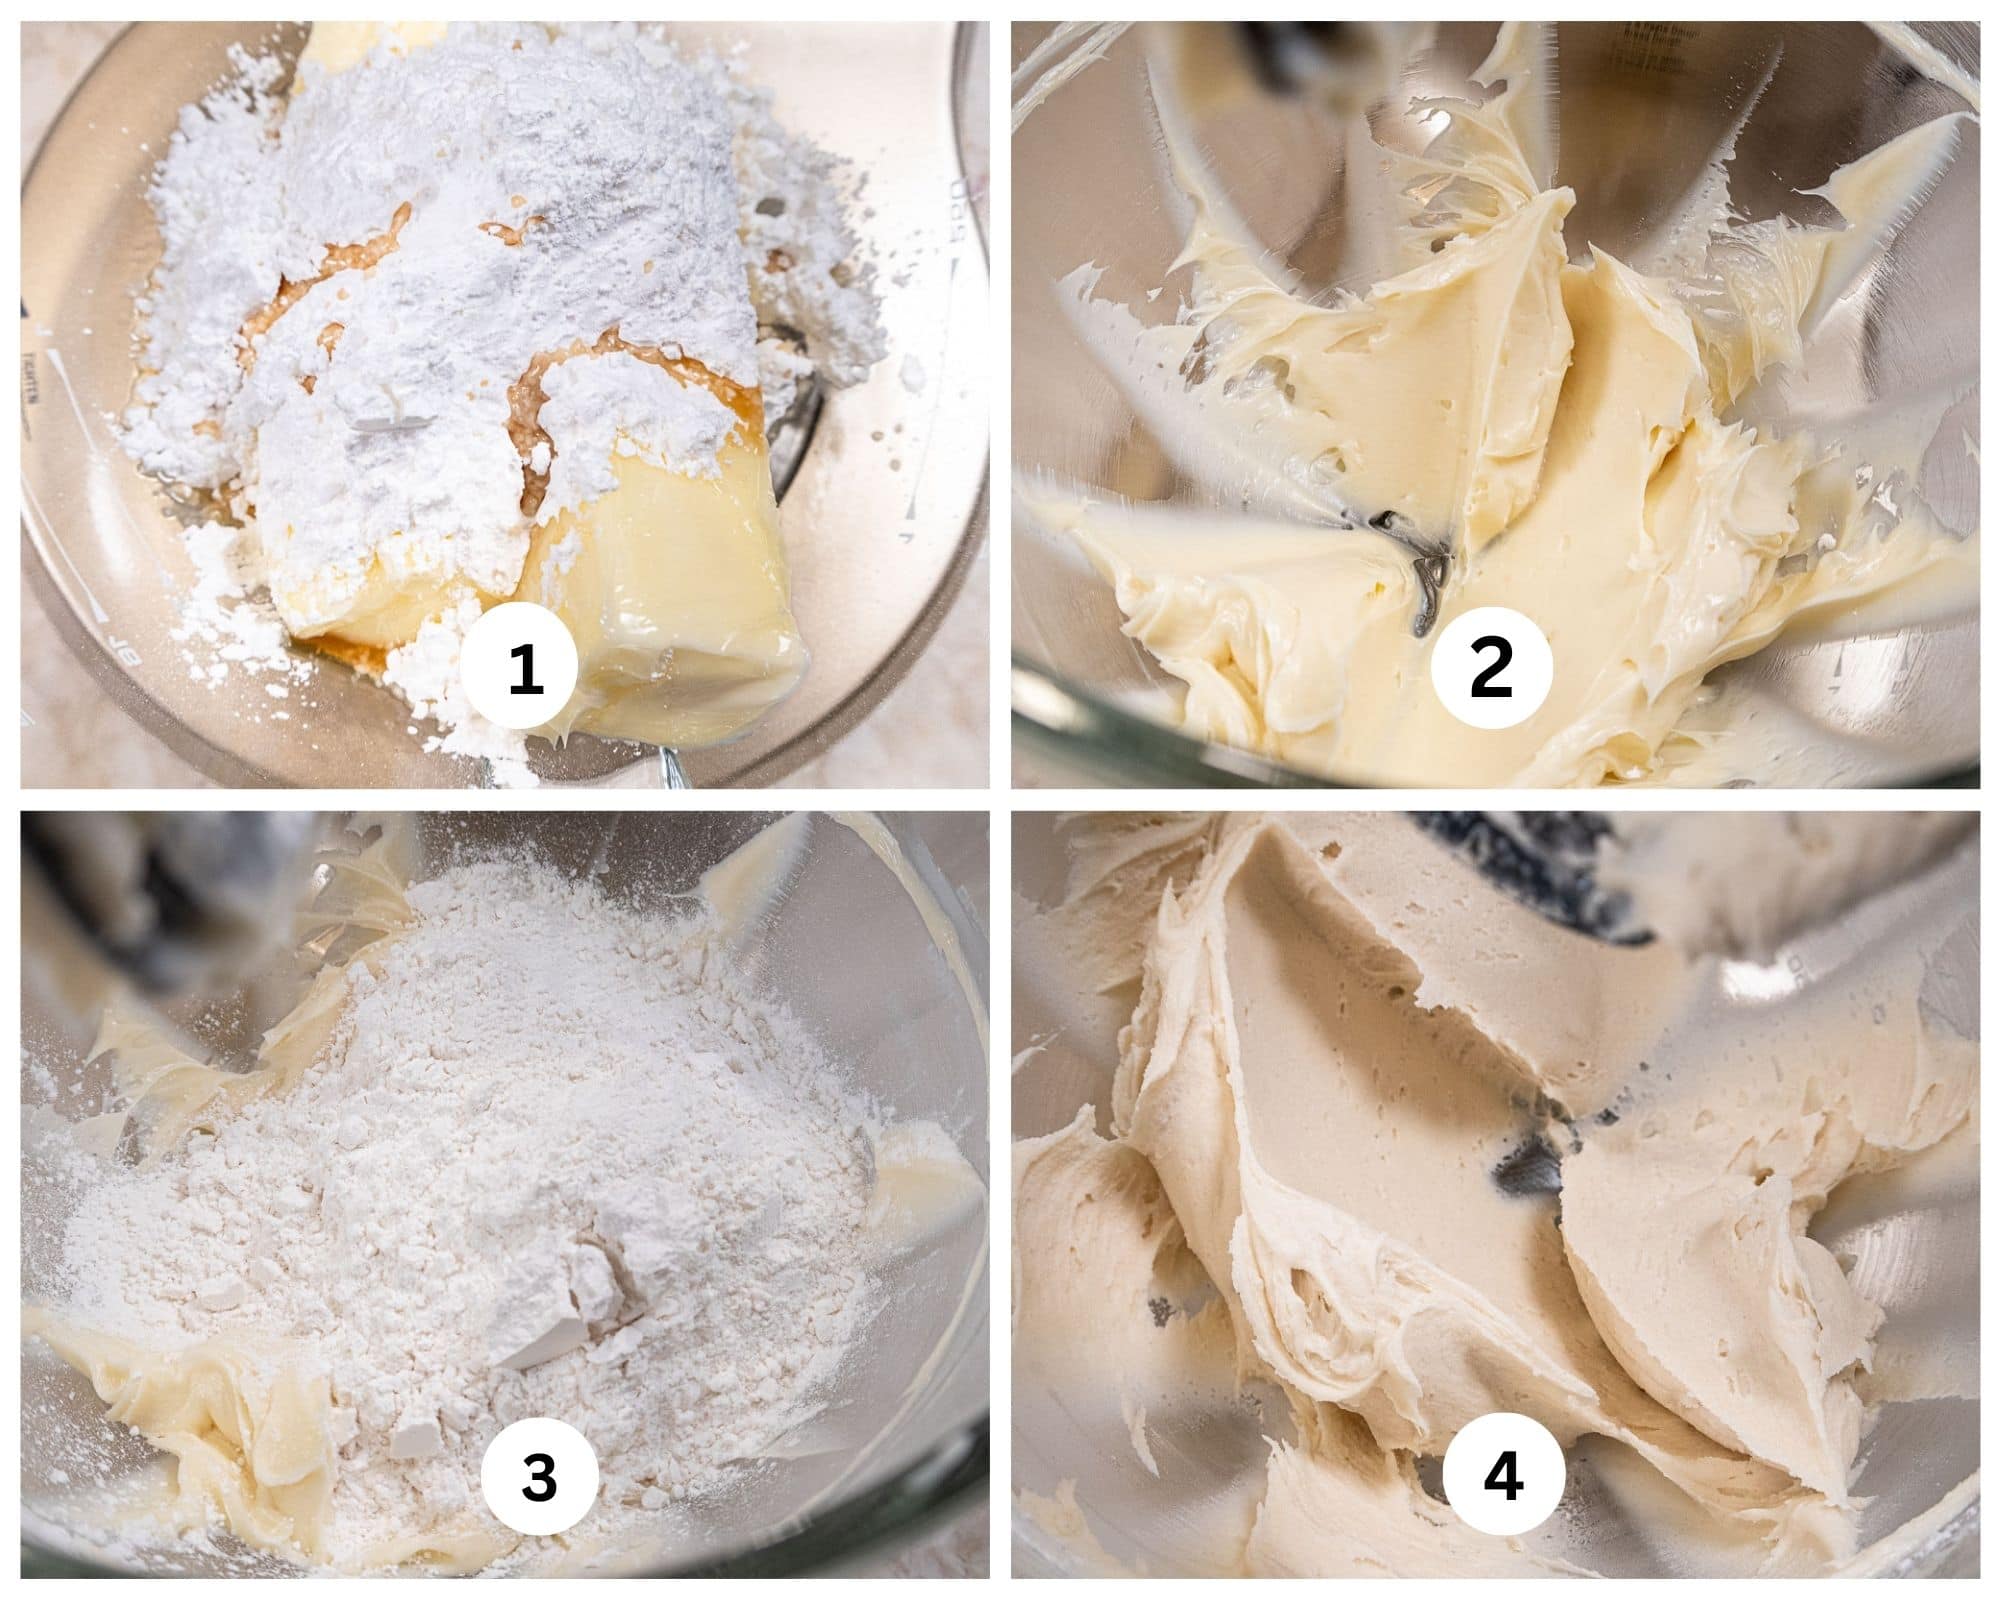 Collage 1 shows the butter, powdered sugar, vanilla, those ingredients mixed, flour added, batter finished.